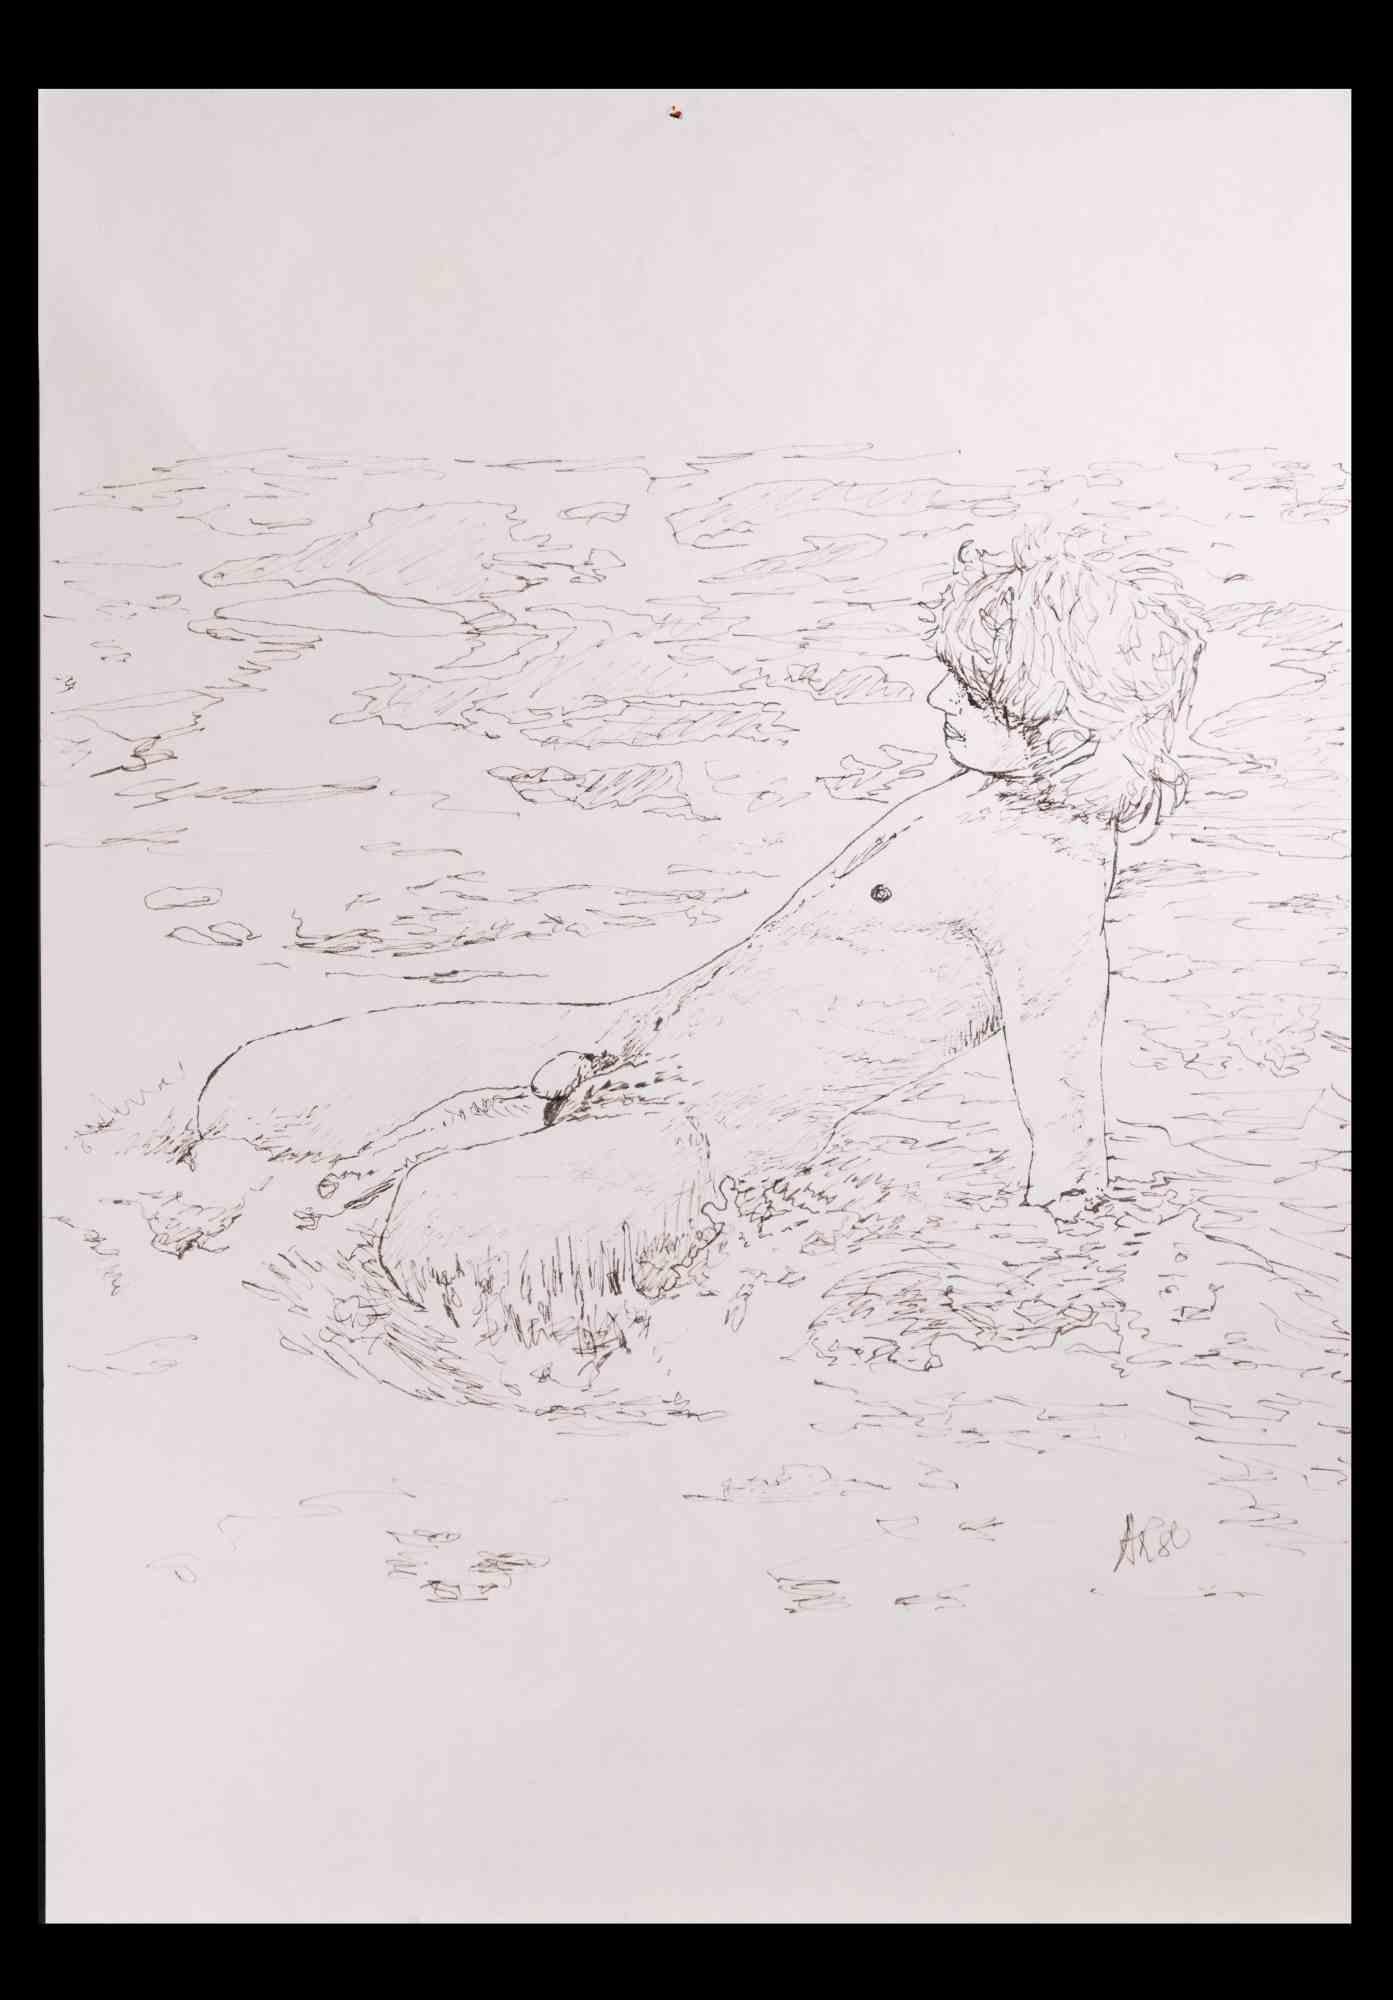 The Boy at the Sea - Drawing by Anthony Roaland - 1980